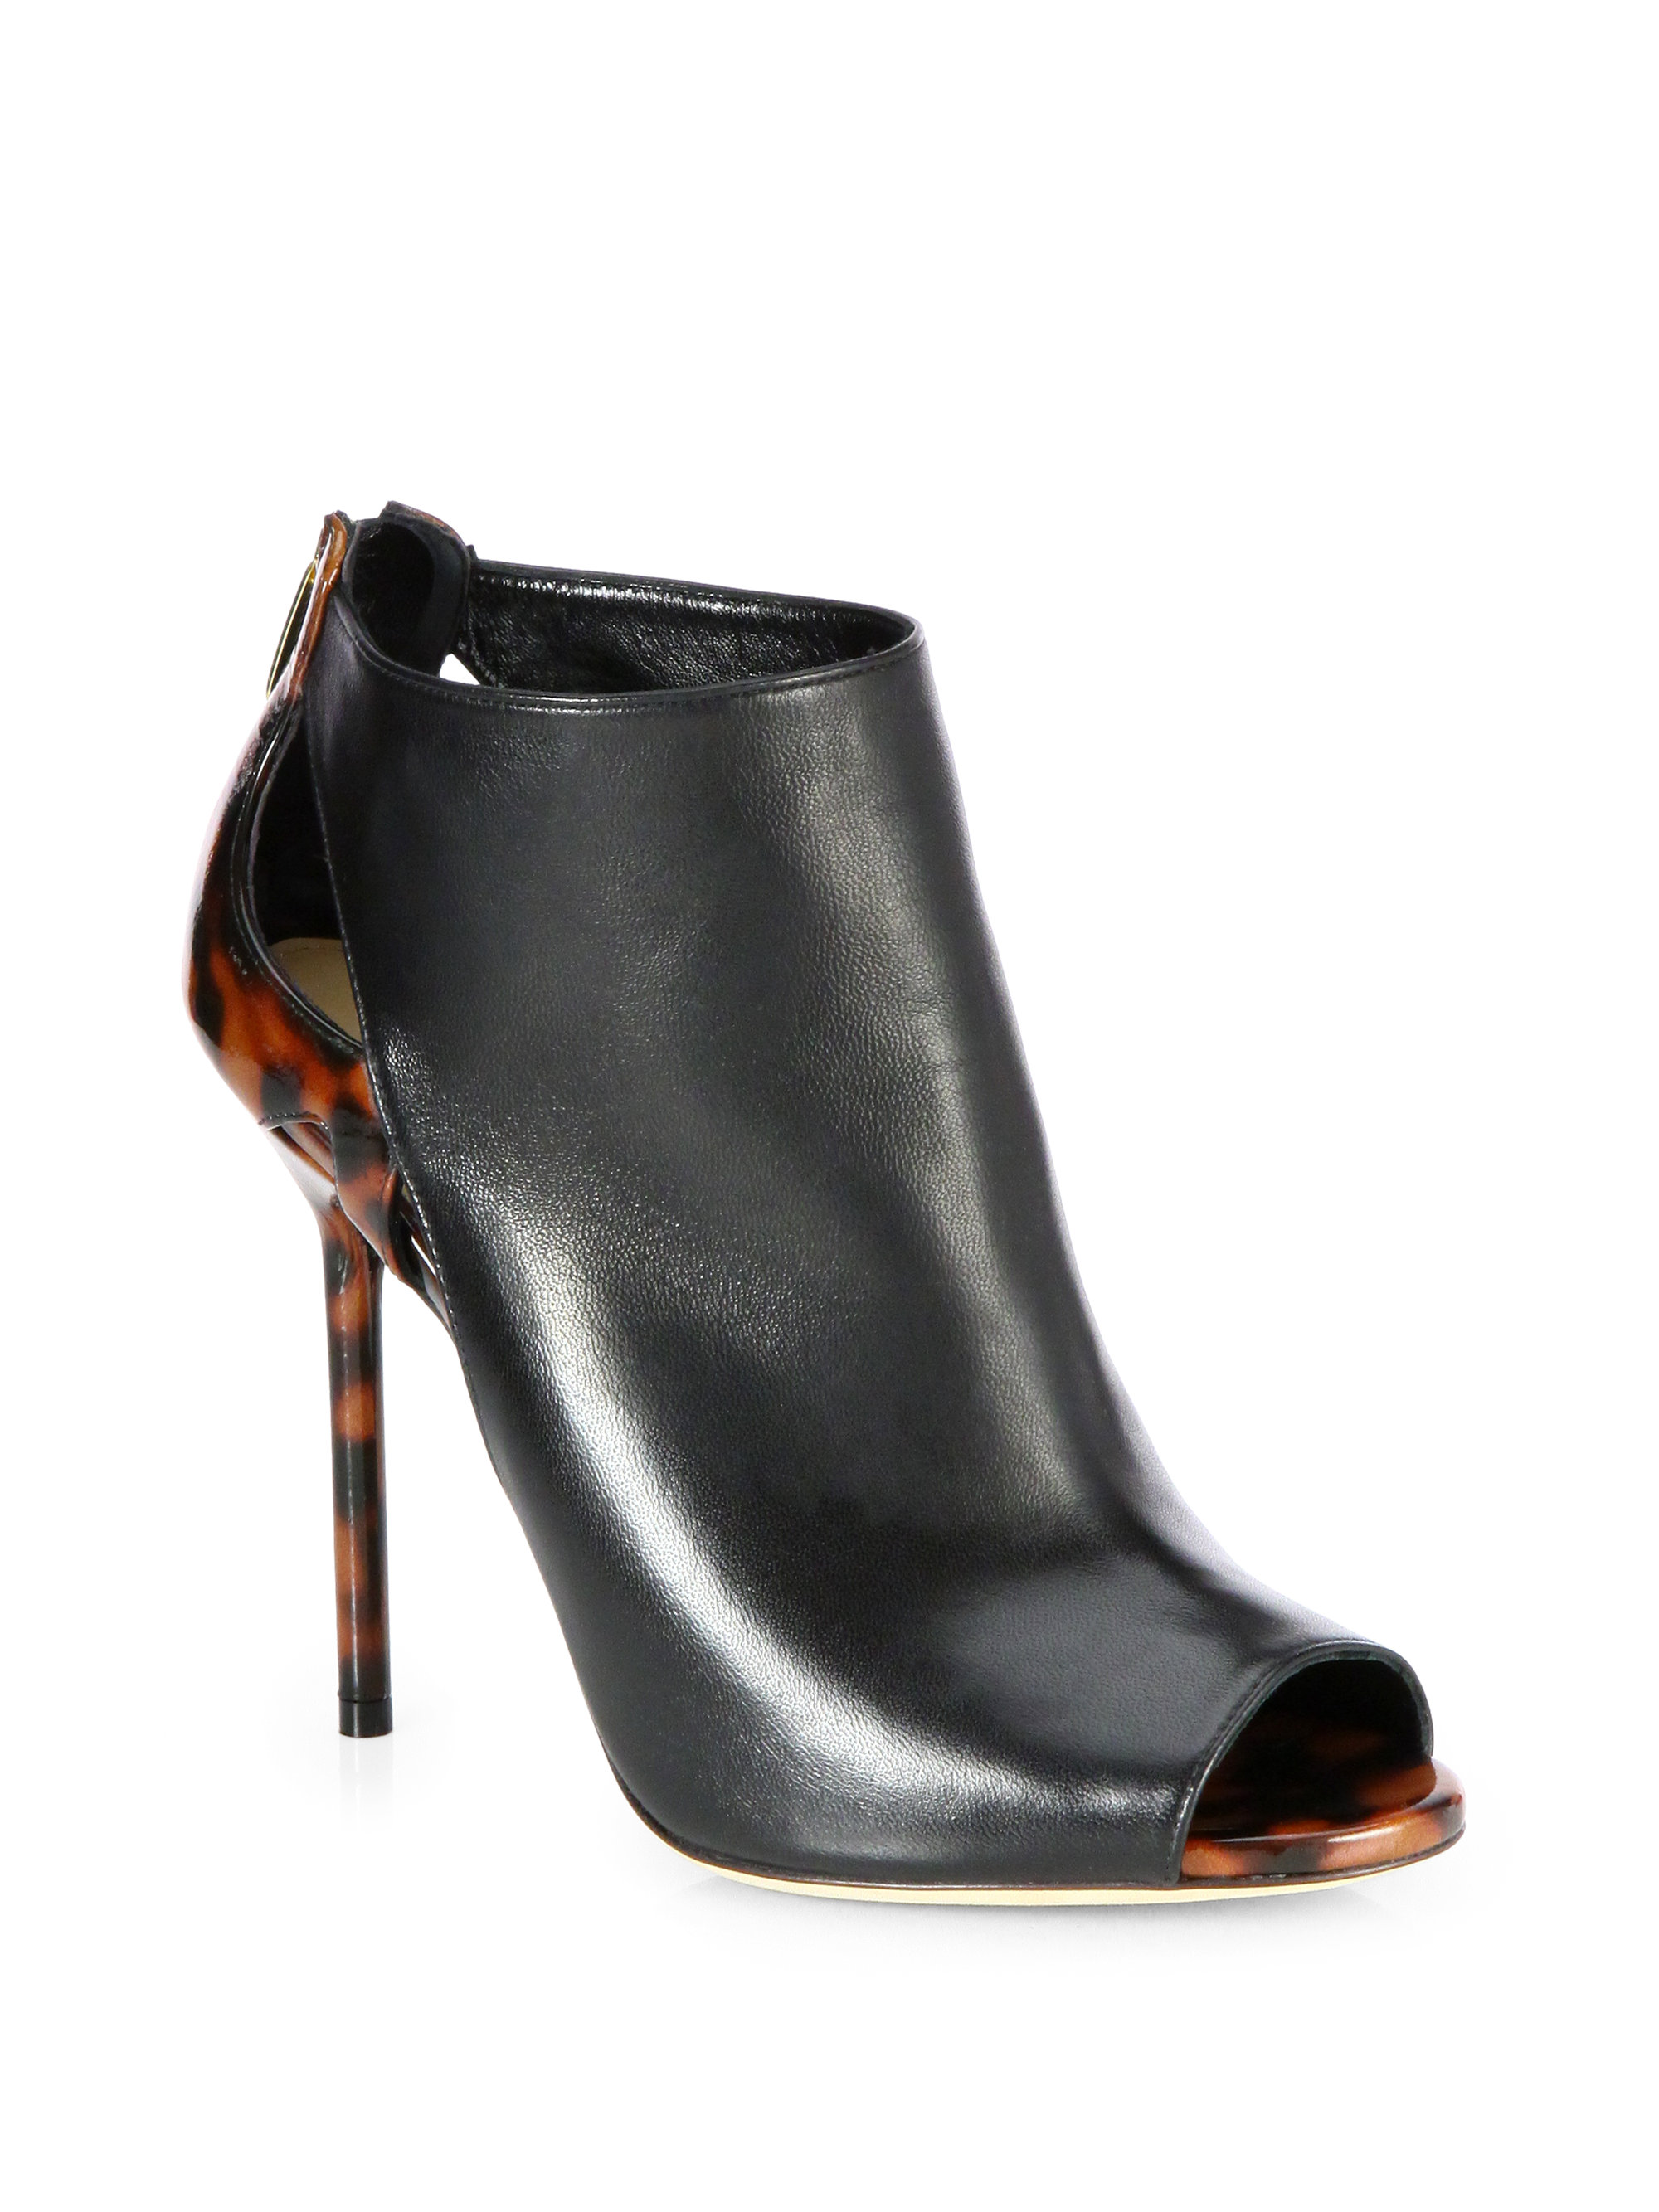 Lyst - Sergio Rossi Moon Peeptoe Leather Ankle Boots in Black